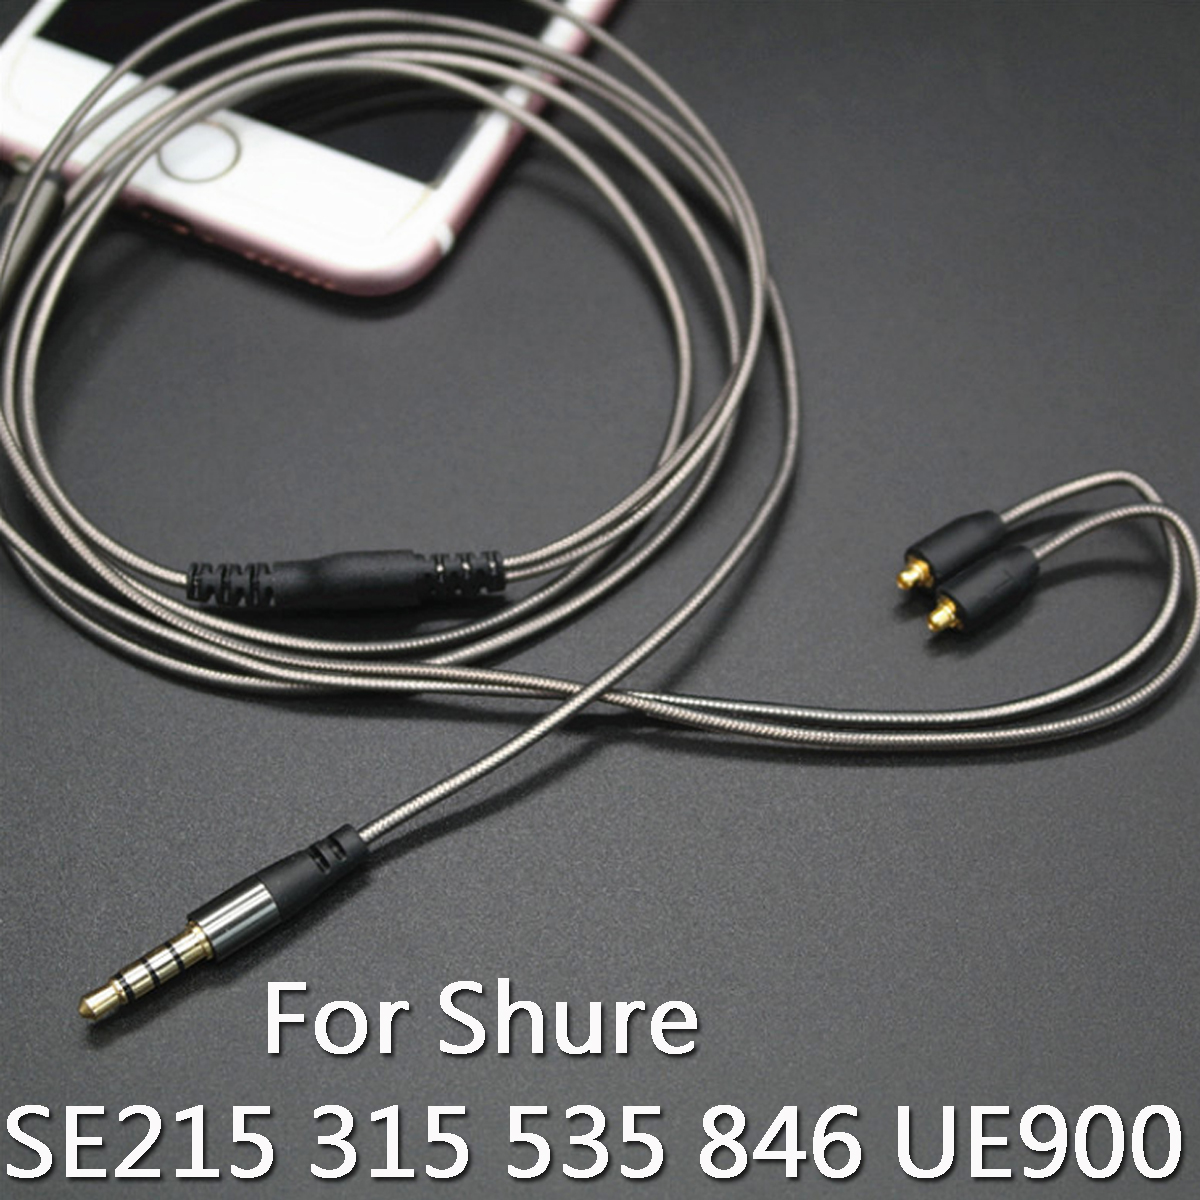 128M-Replacement-Audio-Cord-Cable-with-Mic-for-Shure-SE215-315-535-846-UE900-Headphone-1154717-4